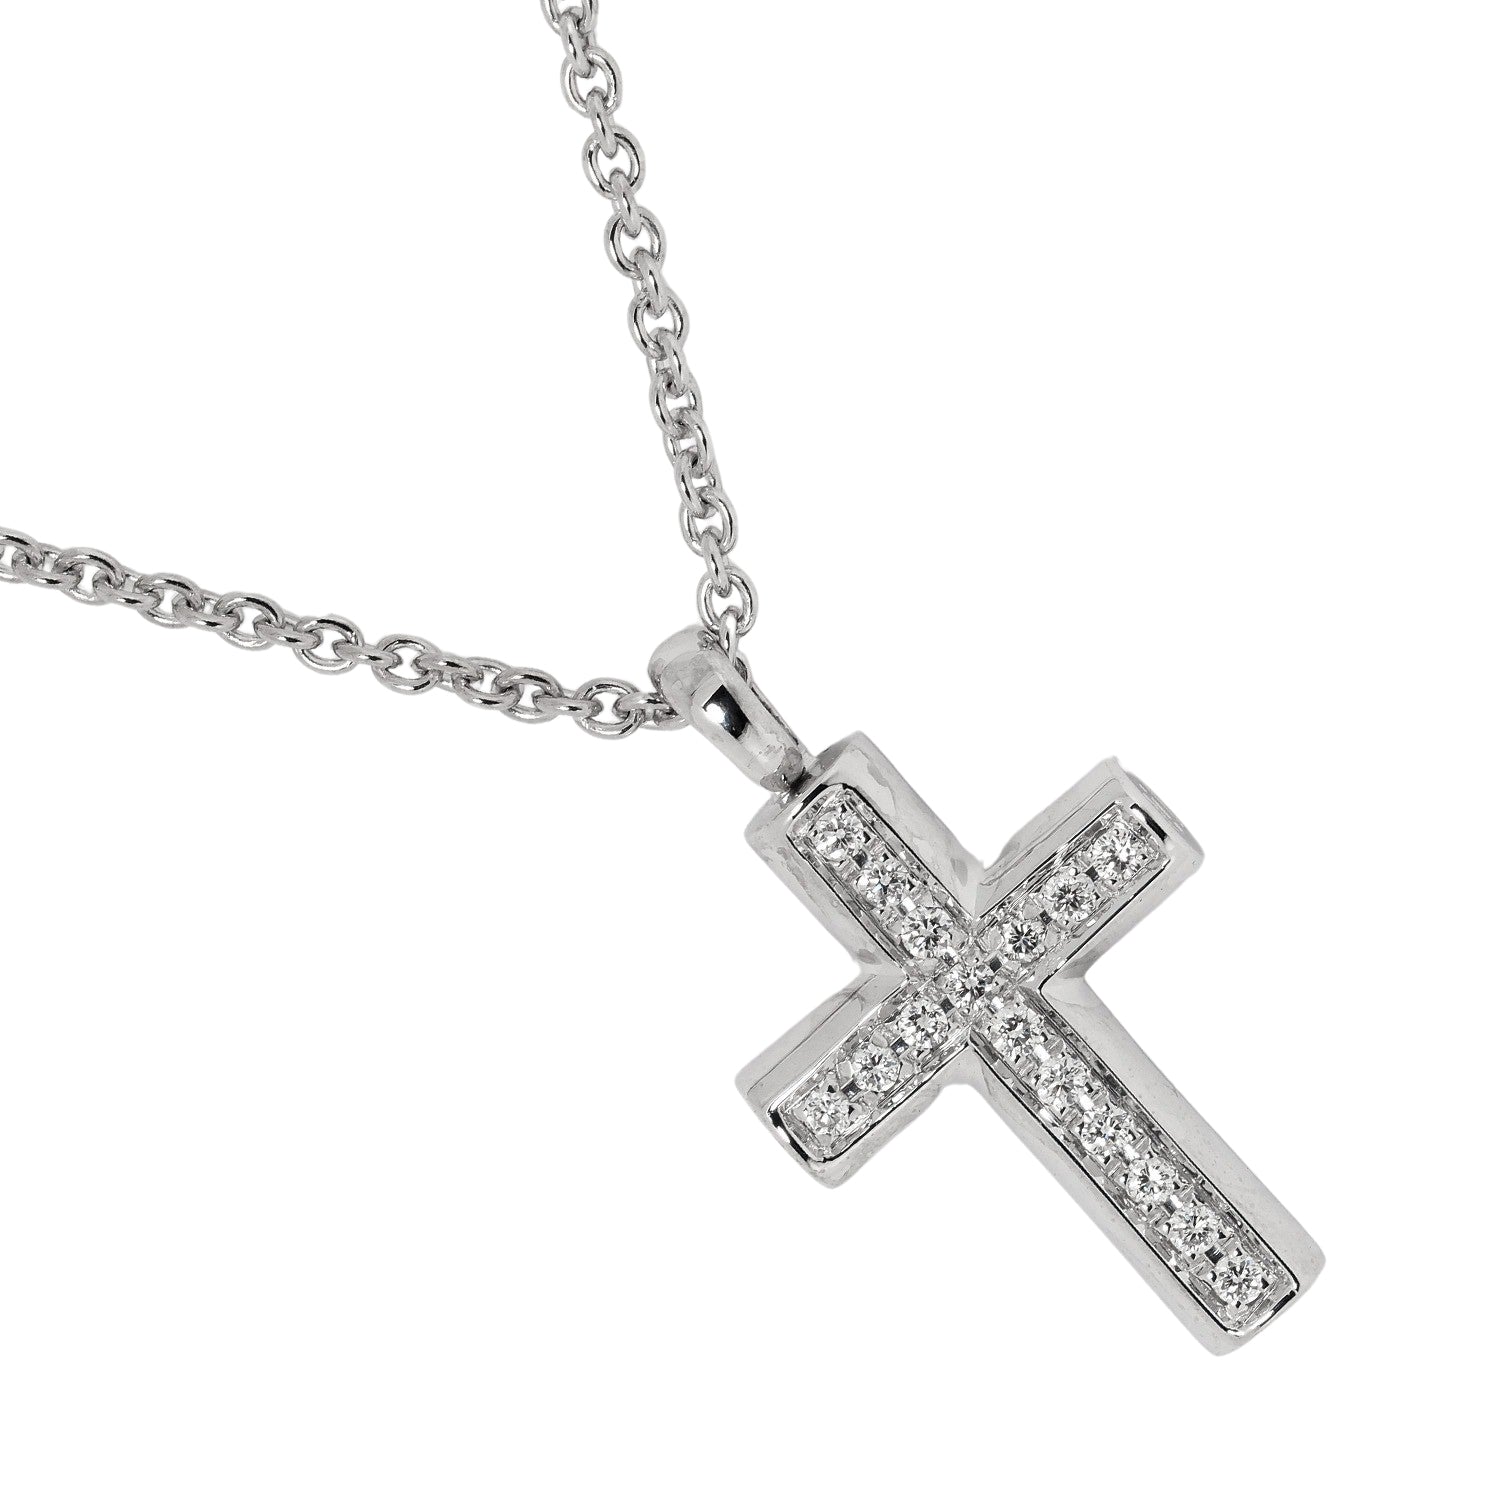 BVLGARI Latin Cross Necklace, 9.53g, K18 White Gold with Diamond Accents